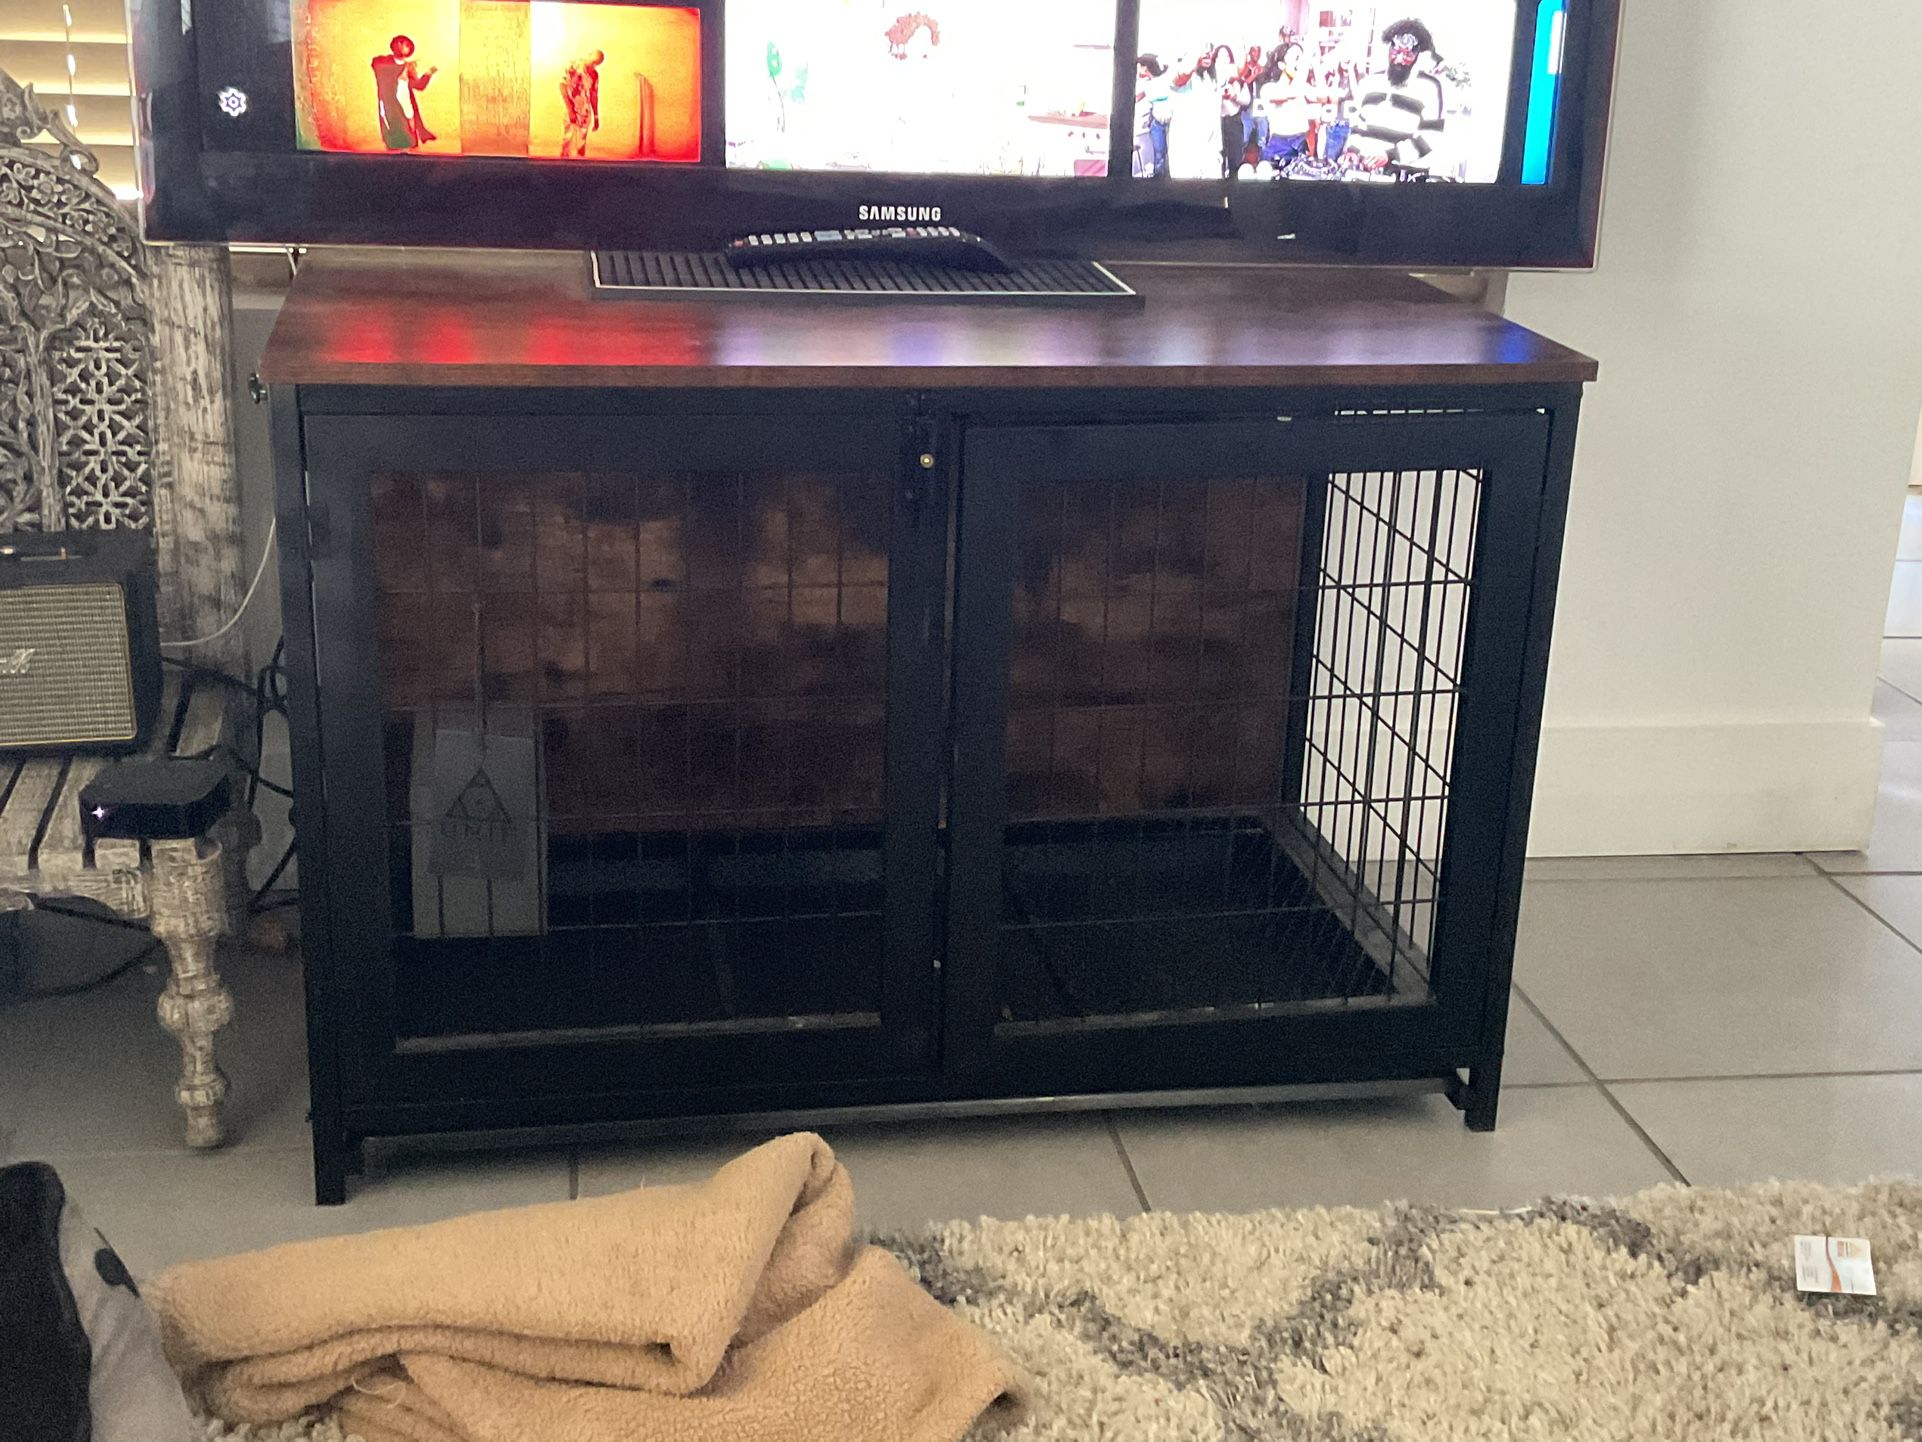 Large Wooden Dog Crate 